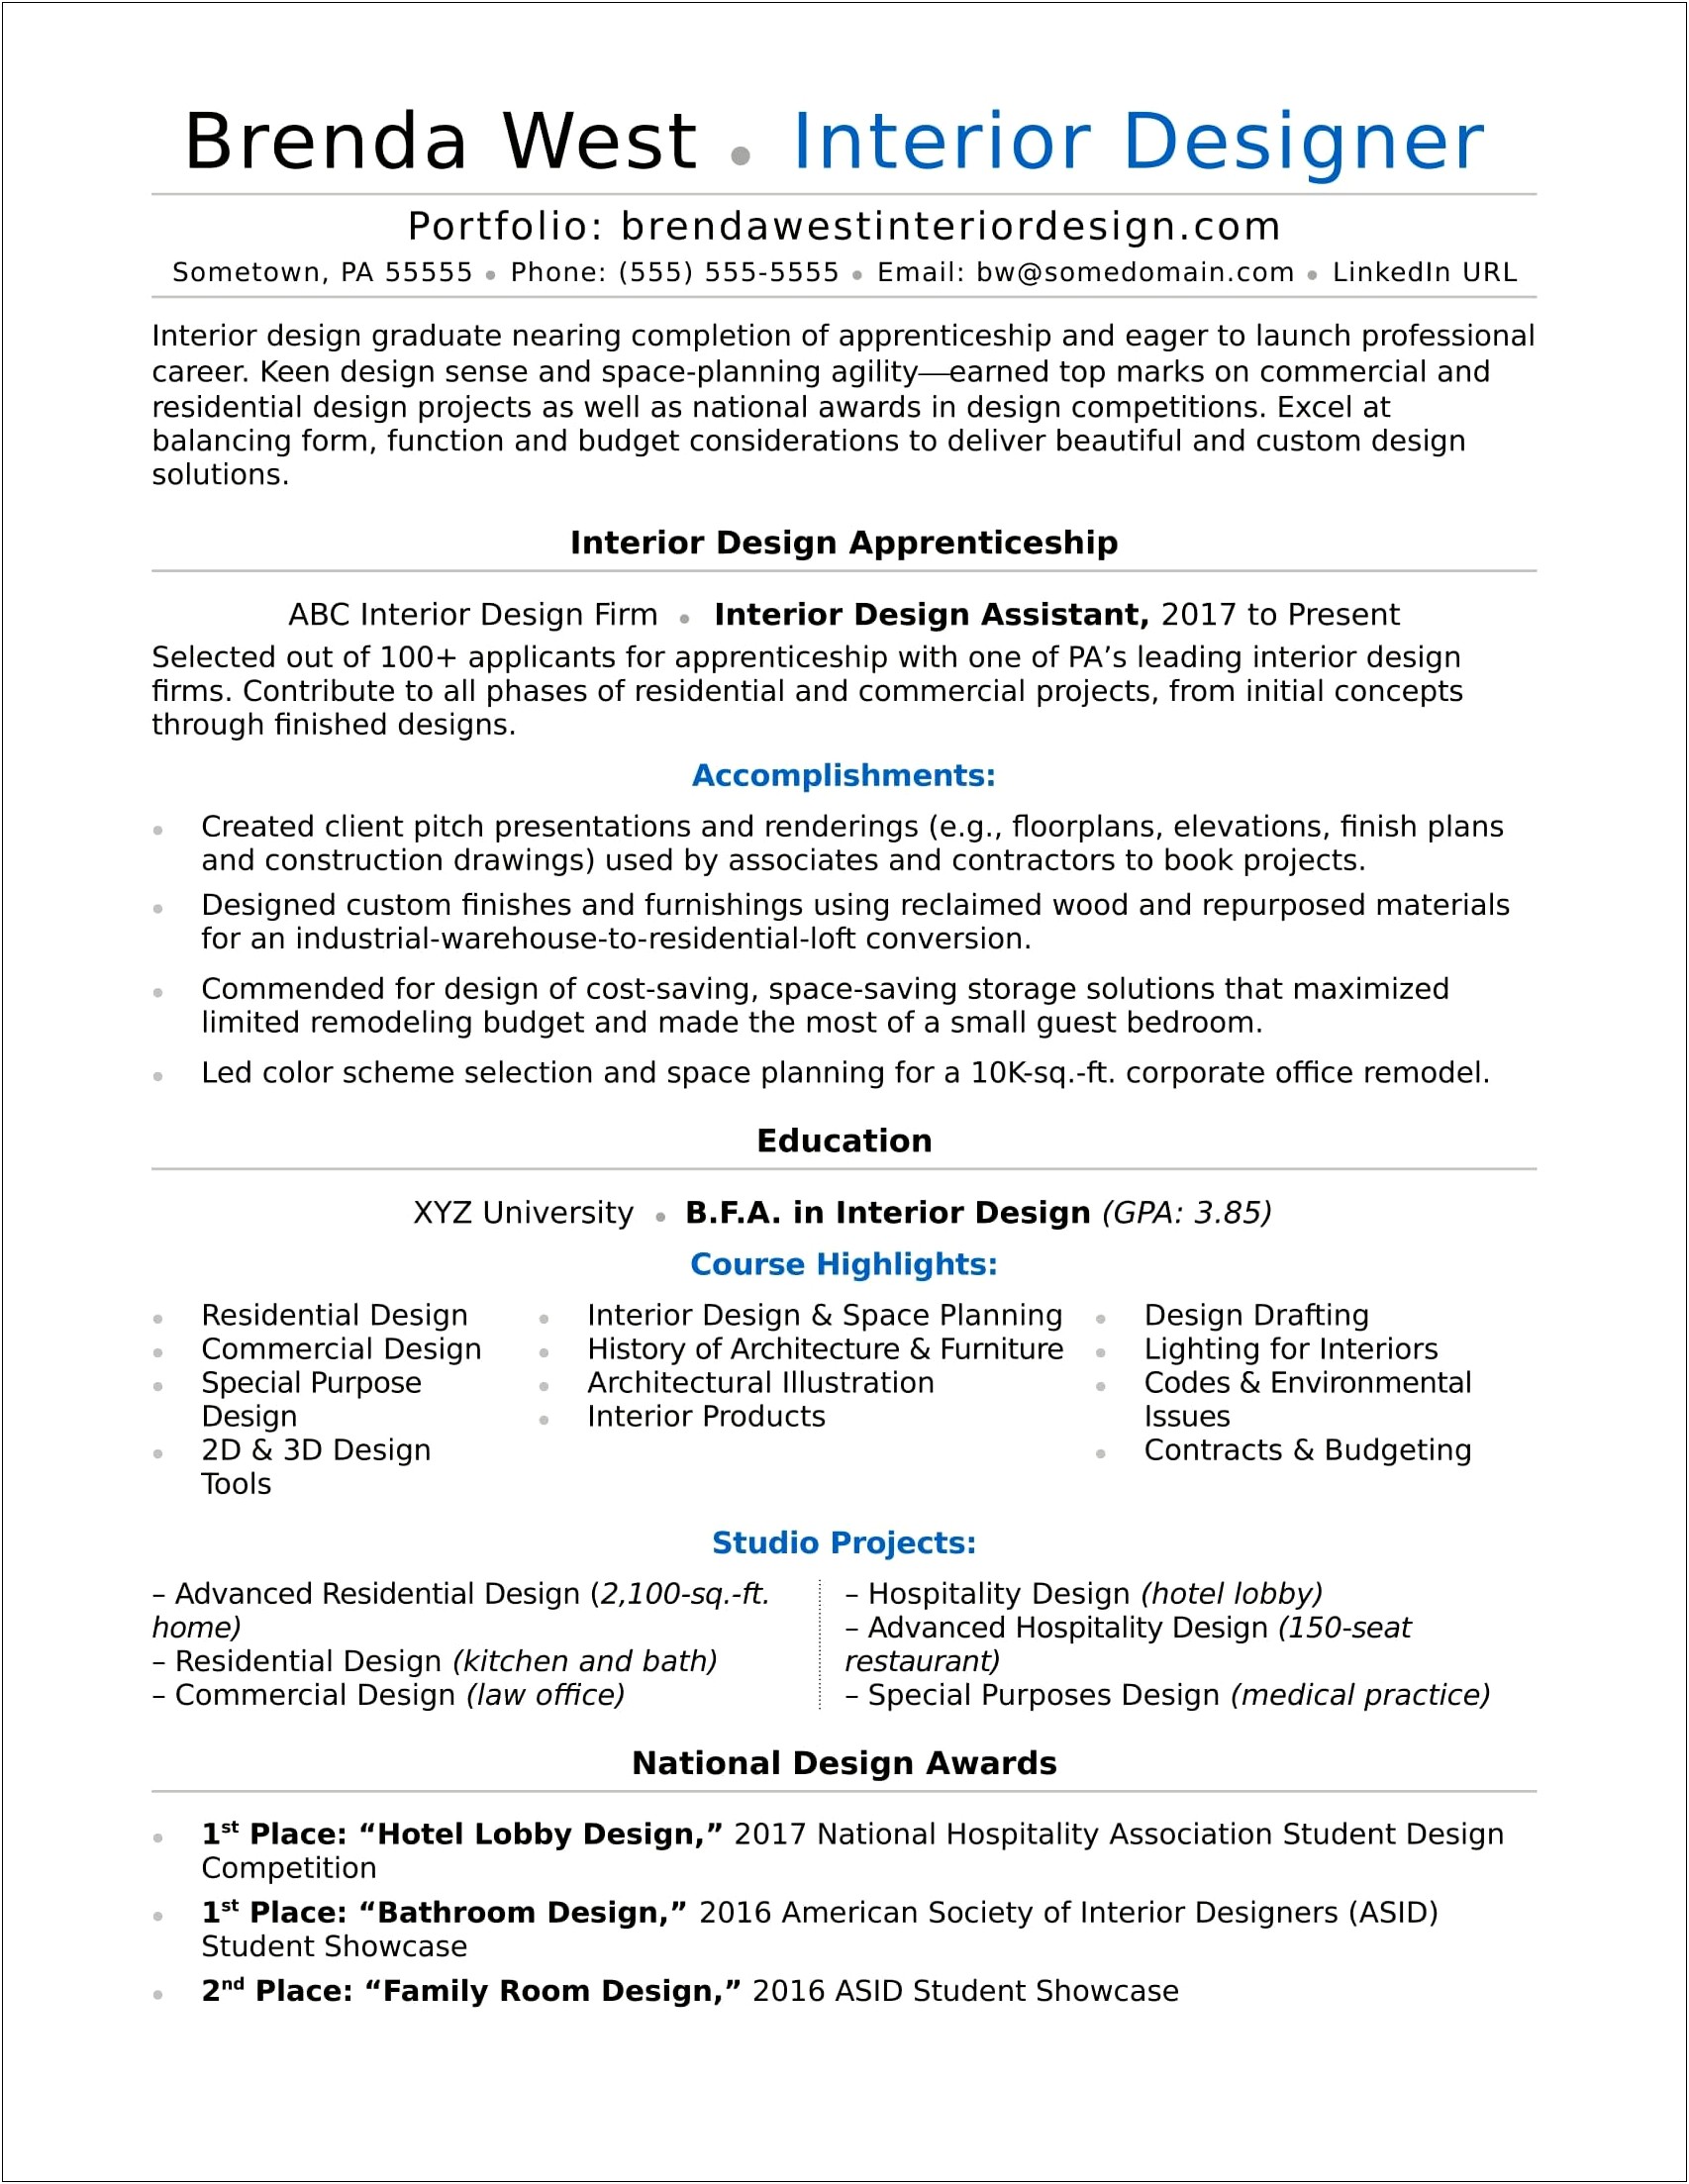 Resume Objective Statements For Designers